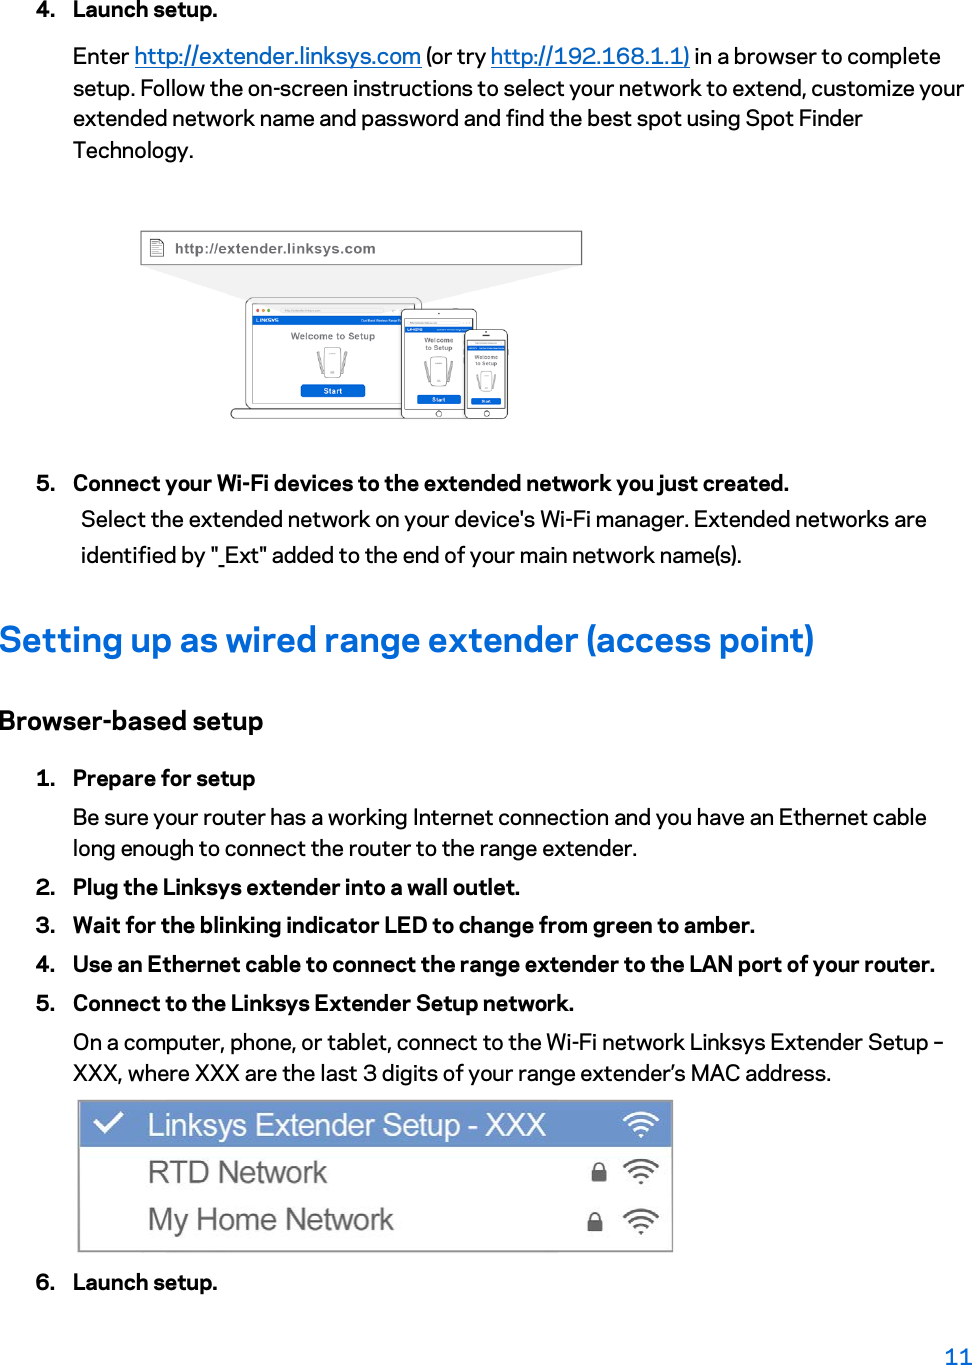 4. Launch setup. Enter http://extender.linksys.com (or try http://192.168.1.1) in a browser to complete setup. Follow the on-screen instructions to select your network to extend, customize your extended network name and password and find the best spot using Spot Finder Technology.  5. Connect your Wi-Fi devices to the extended network you just created. Select the extended network on your device&apos;s Wi-Fi manager. Extended networks are identified by &quot;_Ext&quot; added to the end of your main network name(s). Setting up as wired range extender (access point) Browser-based setup 1. Prepare for setup Be sure your router has a working Internet connection and you have an Ethernet cable long enough to connect the router to the range extender. 2. Plug the Linksys extender into a wall outlet. 3. Wait for the blinking indicator LED to change from green to amber. 4. Use an Ethernet cable to connect the range extender to the LAN port of your router. 5. Connect to the Linksys Extender Setup network. On a computer, phone, or tablet, connect to the Wi-Fi network Linksys Extender Setup – XXX, where XXX are the last 3 digits of your range extender’s MAC address.  6. Launch setup. 11  